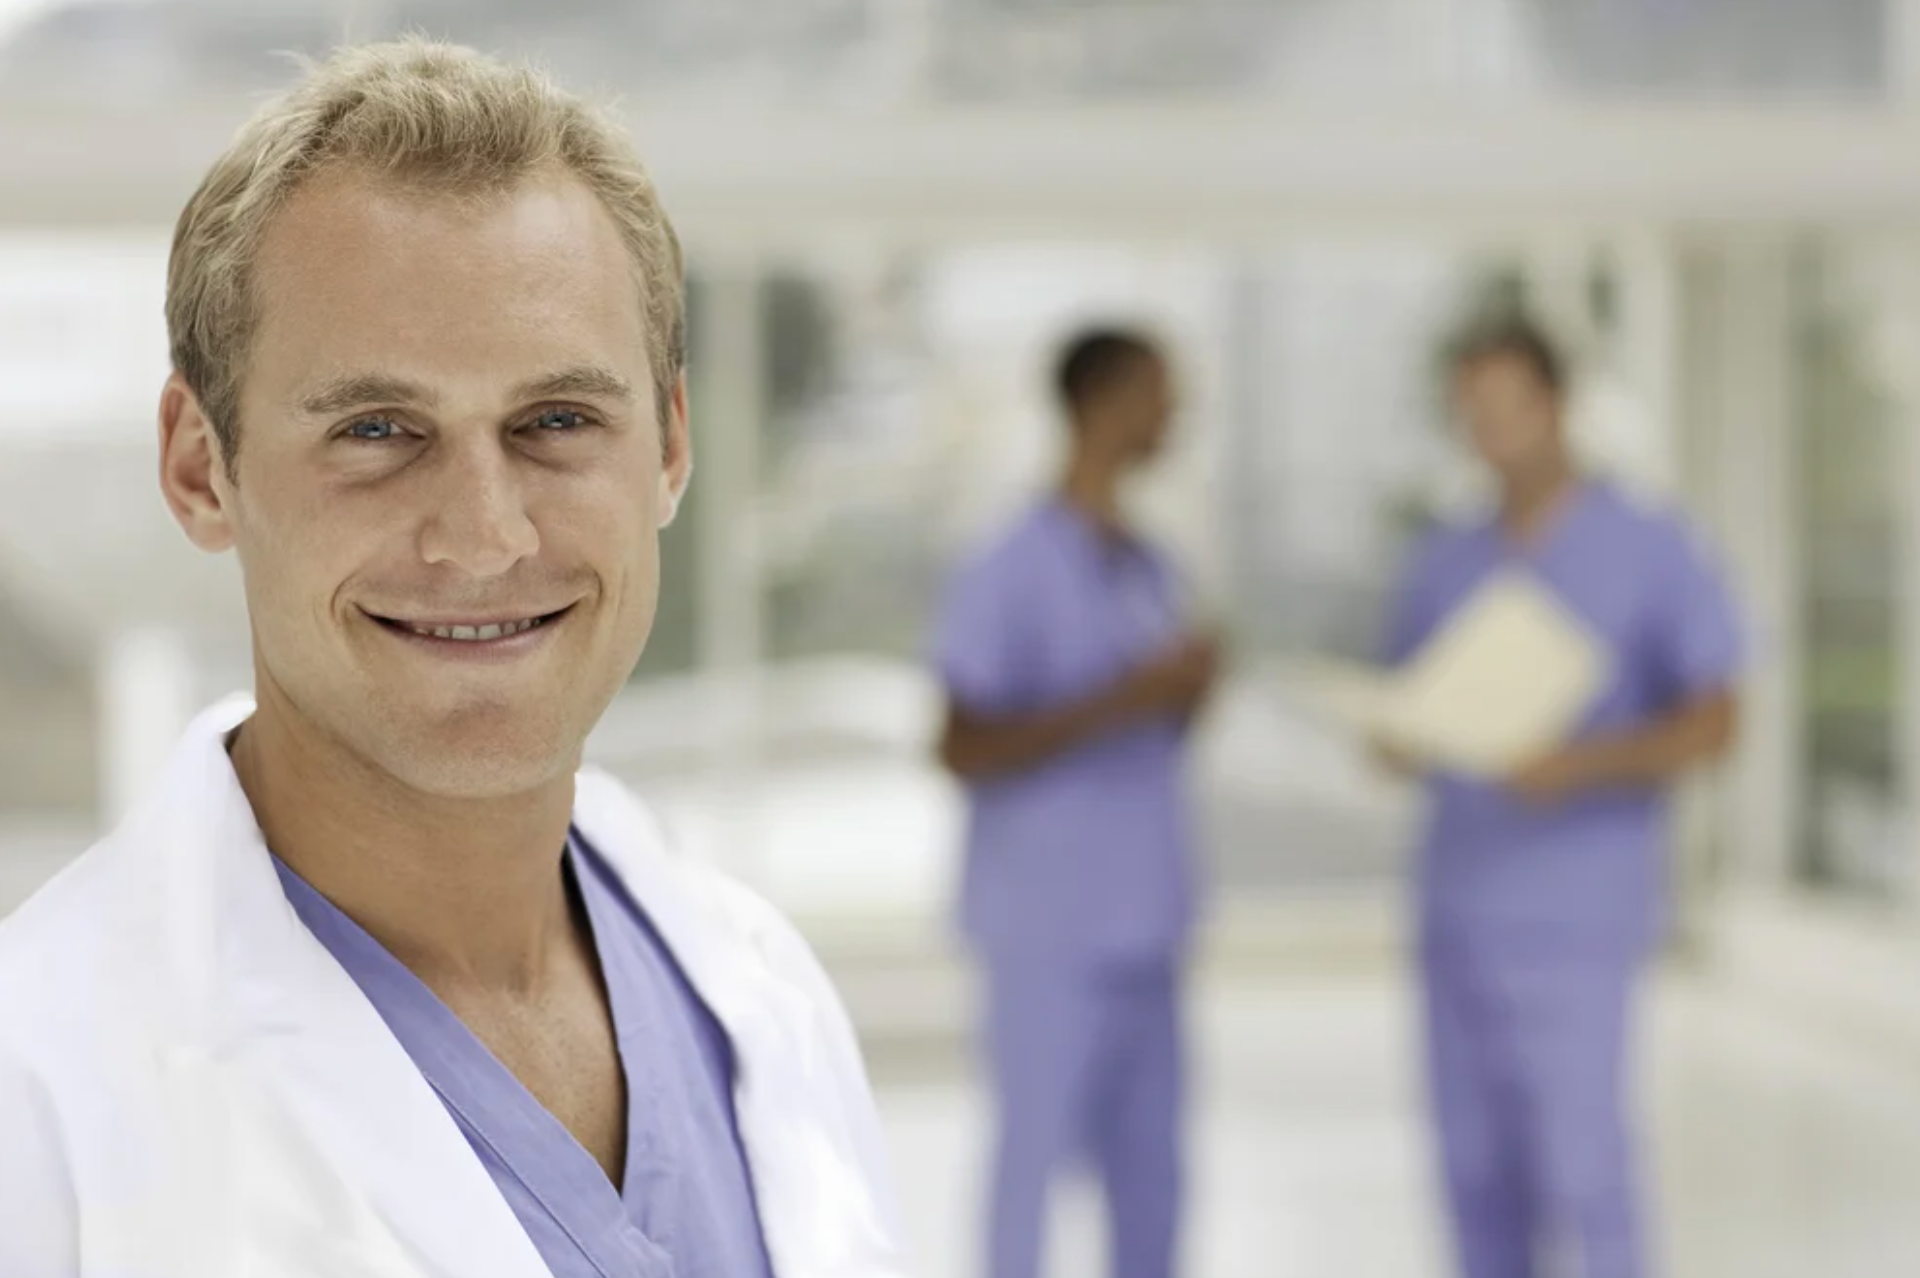 smiling male doctor